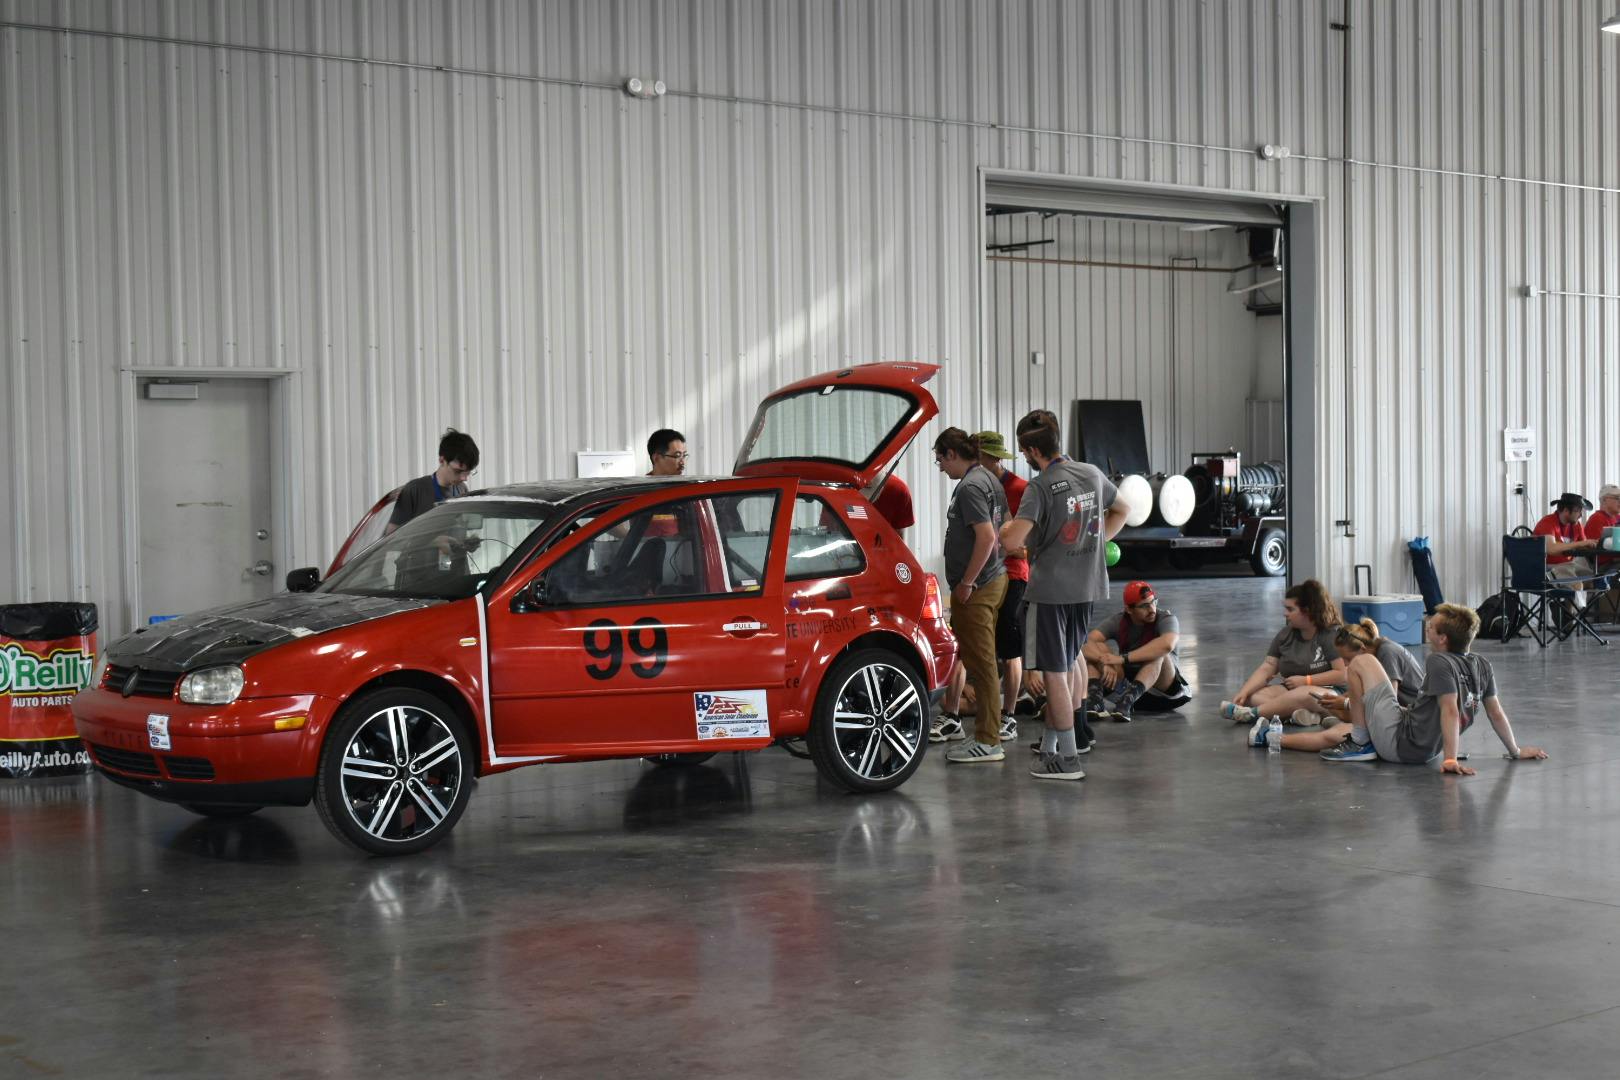 A red hatchback car covered in solar panels in a garage surrounded by a team of engineers working on it